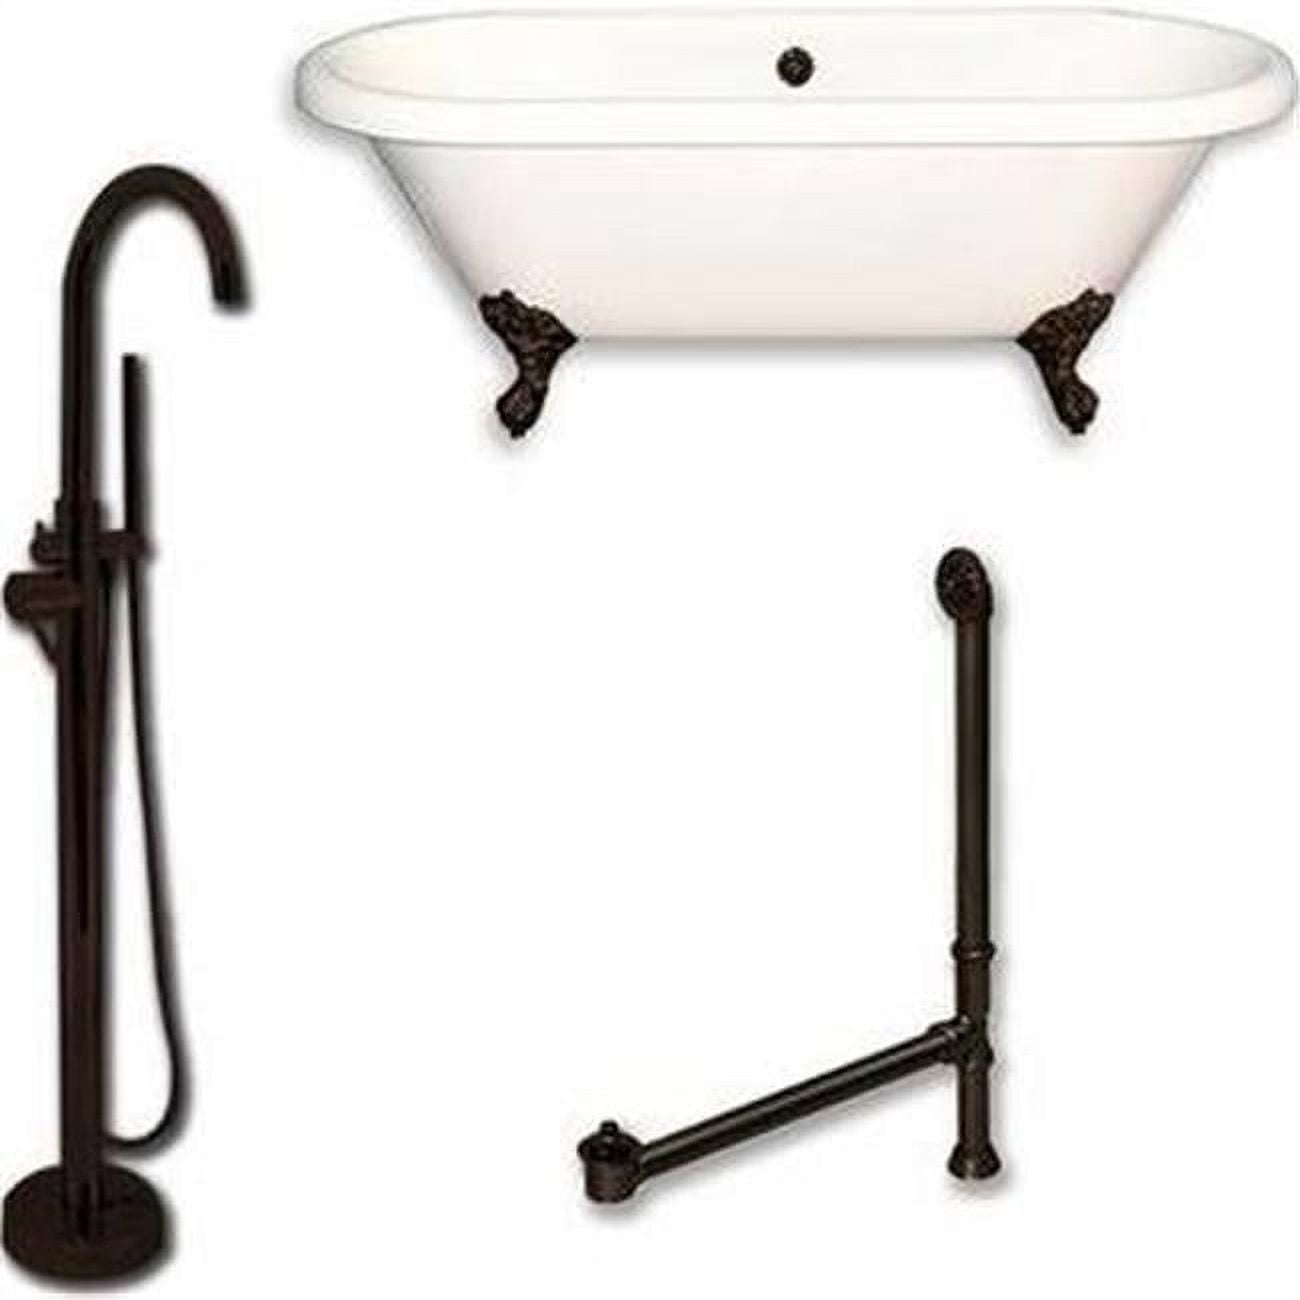 Ade60-150-pkg-orb-nh 60 X 30 In. Acrylic Double Ended Clawfoot Bathtub With No Faucet Drillings & Oil Rubbed Bronze Plumbing